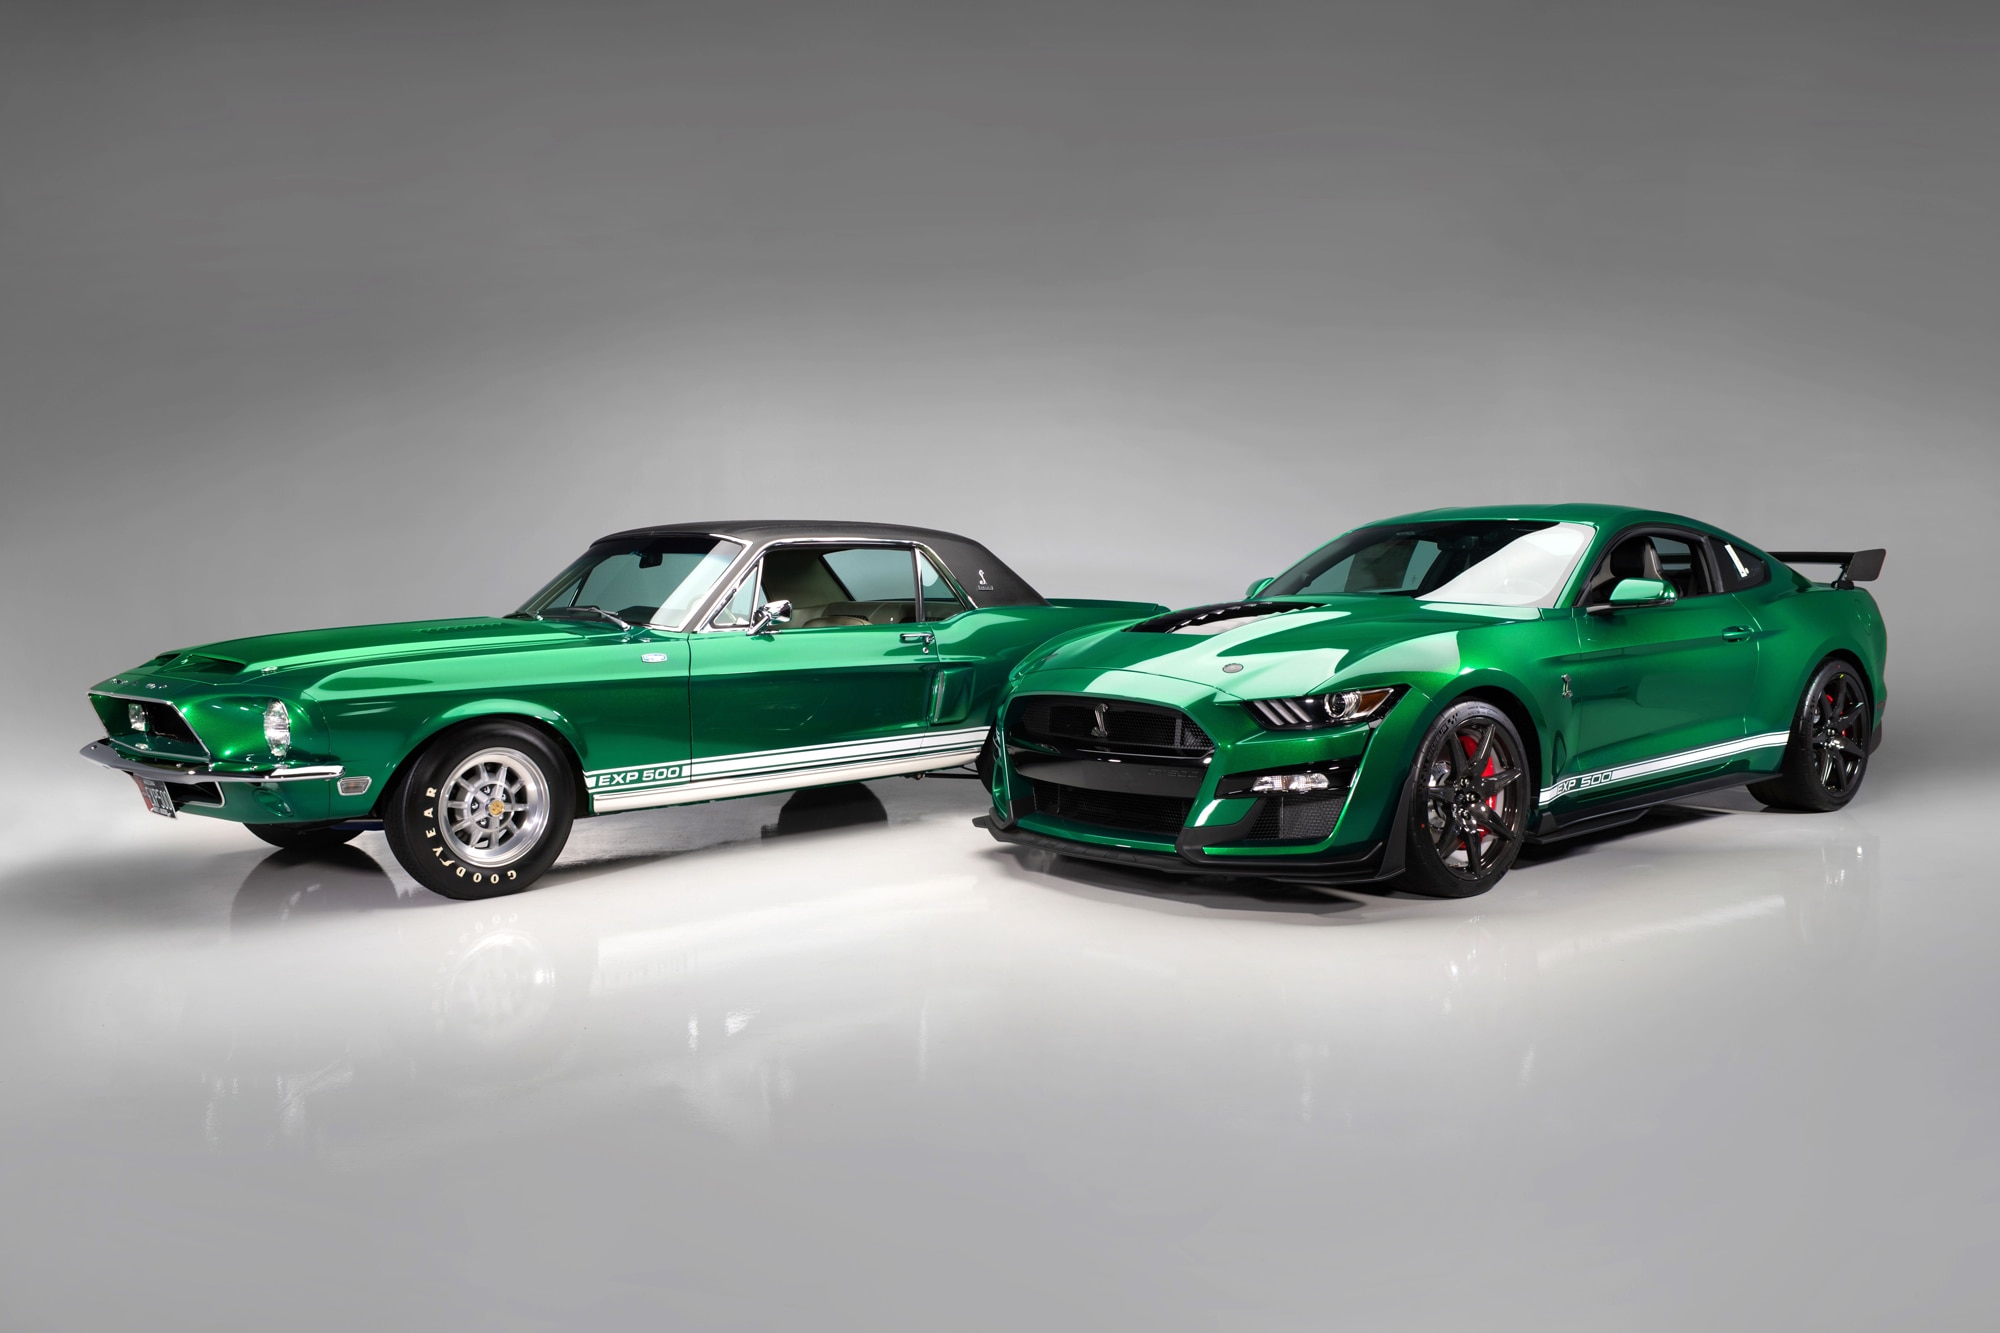 1968 Shelby Green Hornet and a green 2020 Shelby GT500